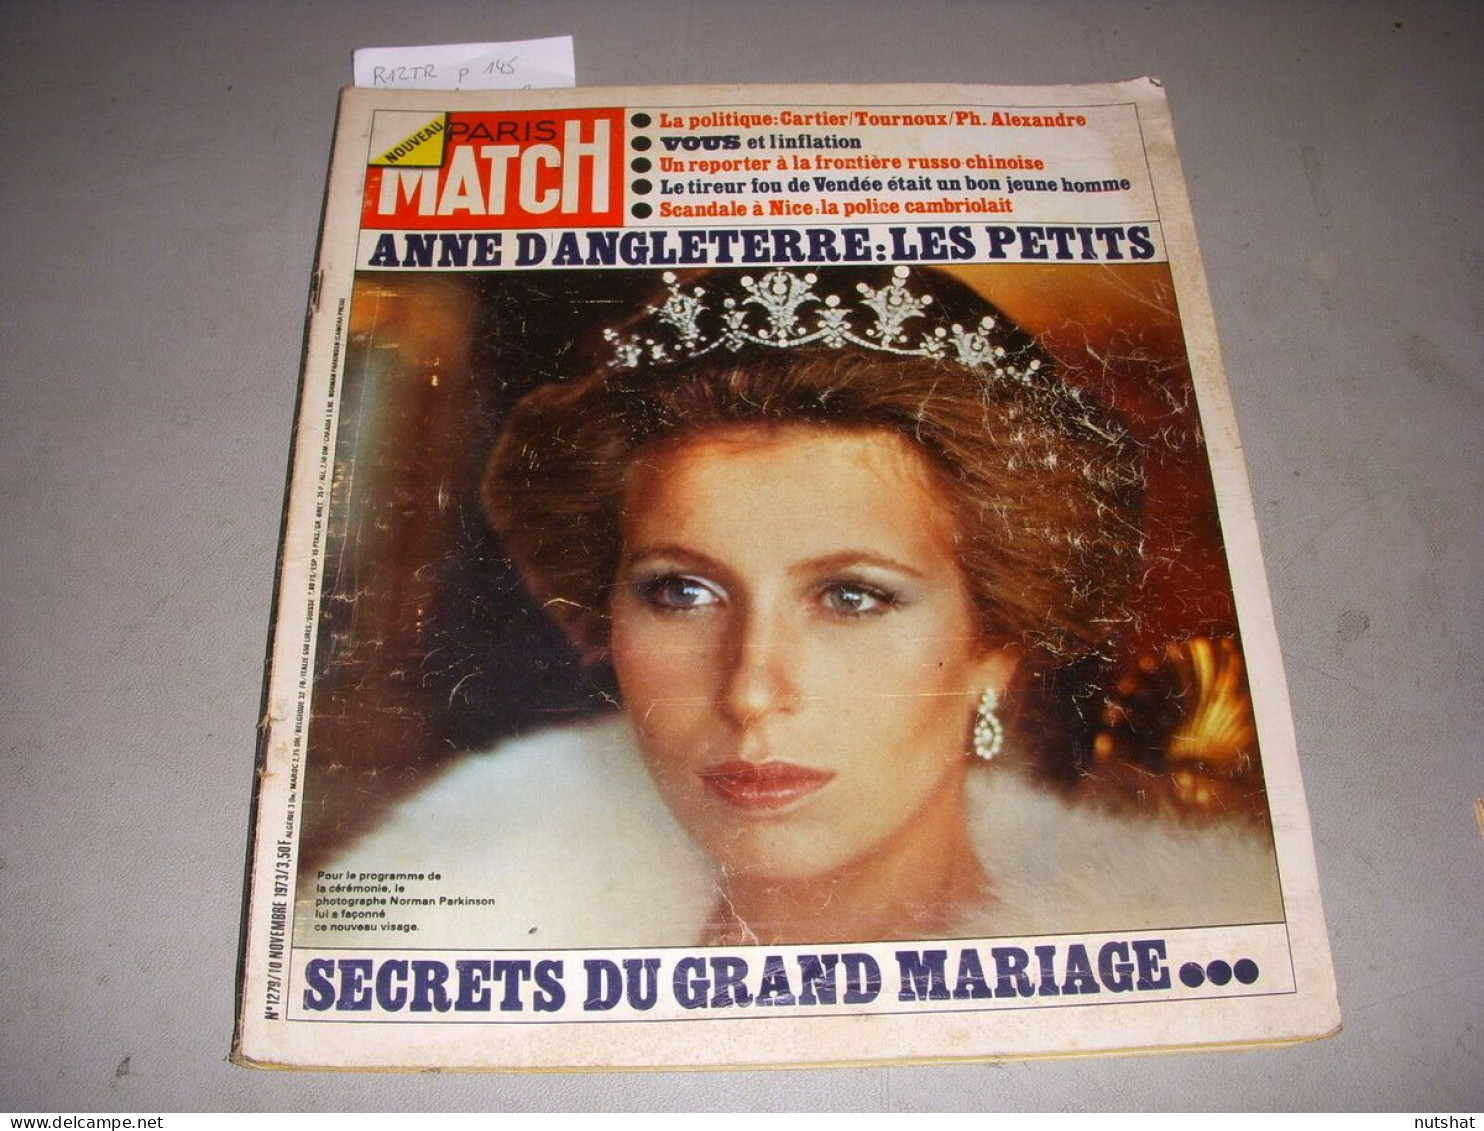 PARIS MATCH 1279 10.11.1973 ANNE ANGLETERRE RENAULT R12TR CHARLOTTE GAINSBOURG - General Issues